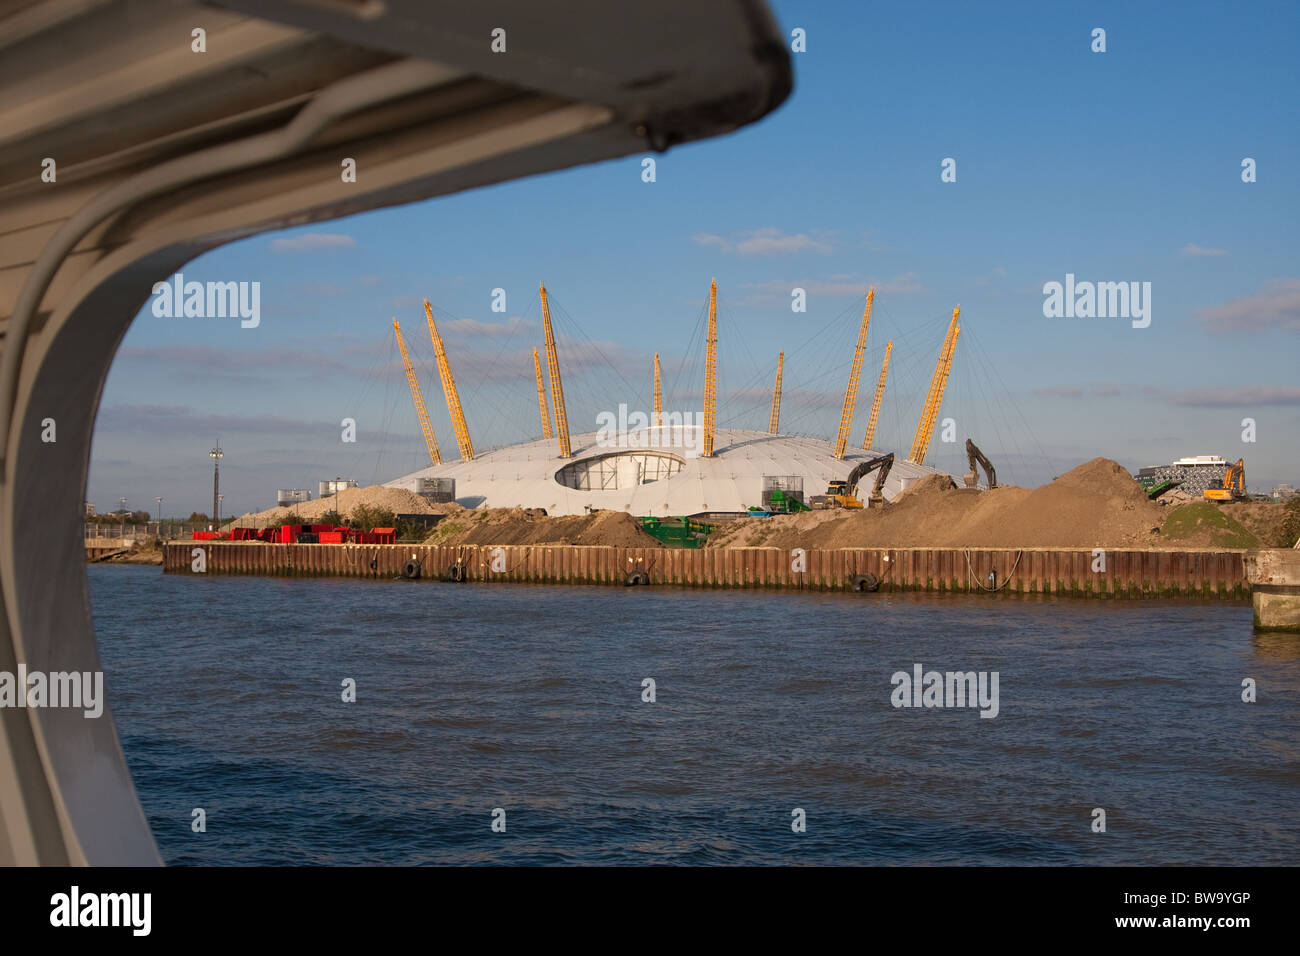 The O2 (formerly the Millenium Dome) in Greenwich, London, viewed from a passenger ferry on the River Thames. Stock Photo